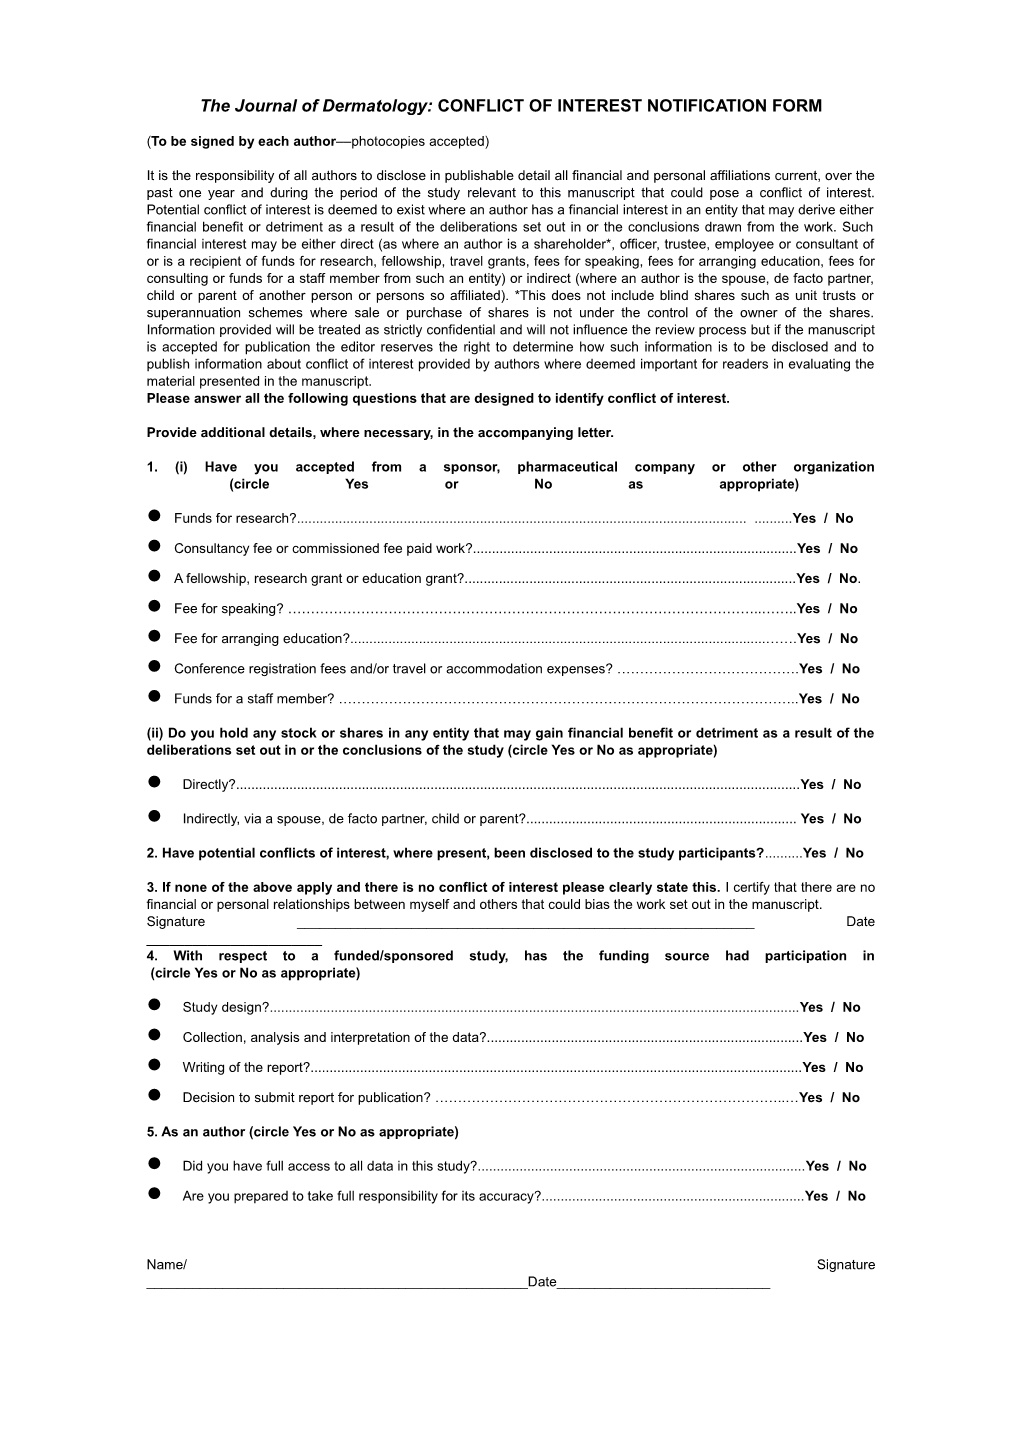 The Journal of Dermatology: CONFLICT of INTEREST NOTIFICATION FORM